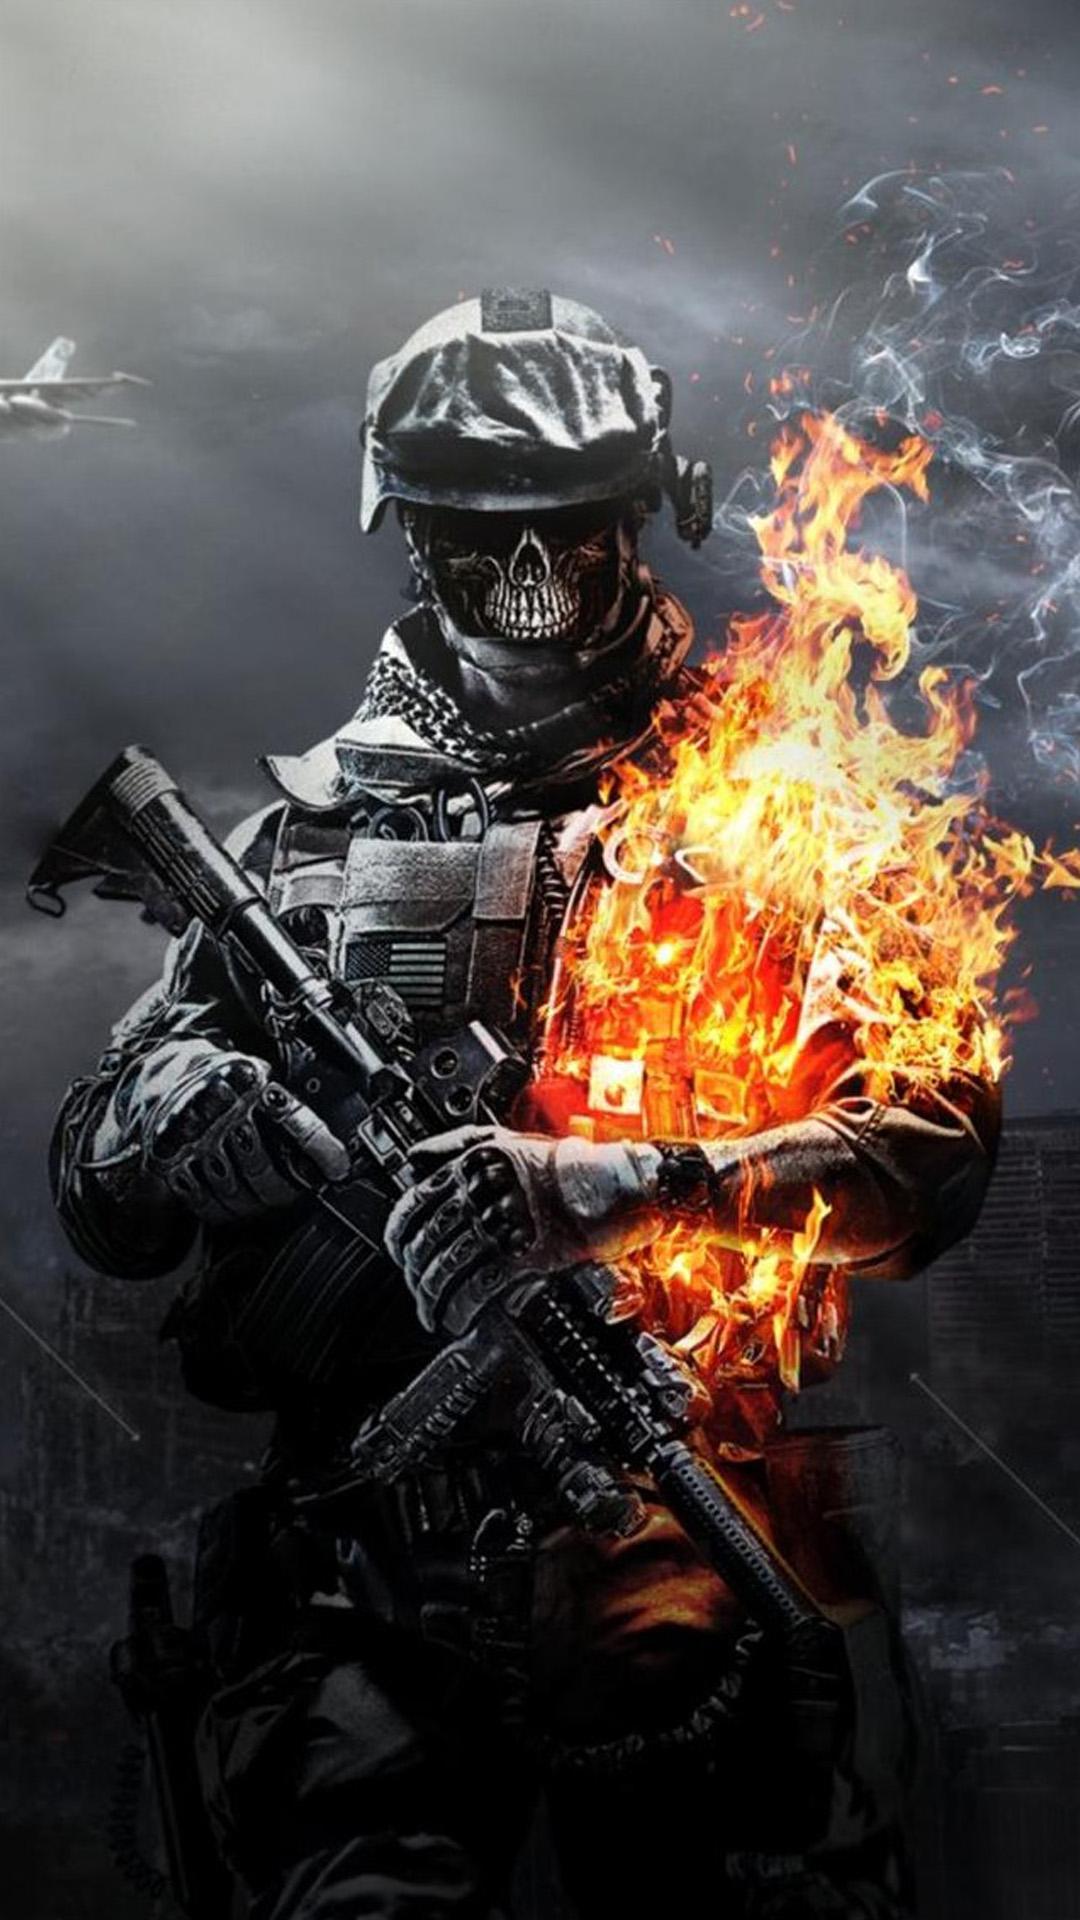 Call Of Duty Wallpaper Android, Free Stock Wallpaper